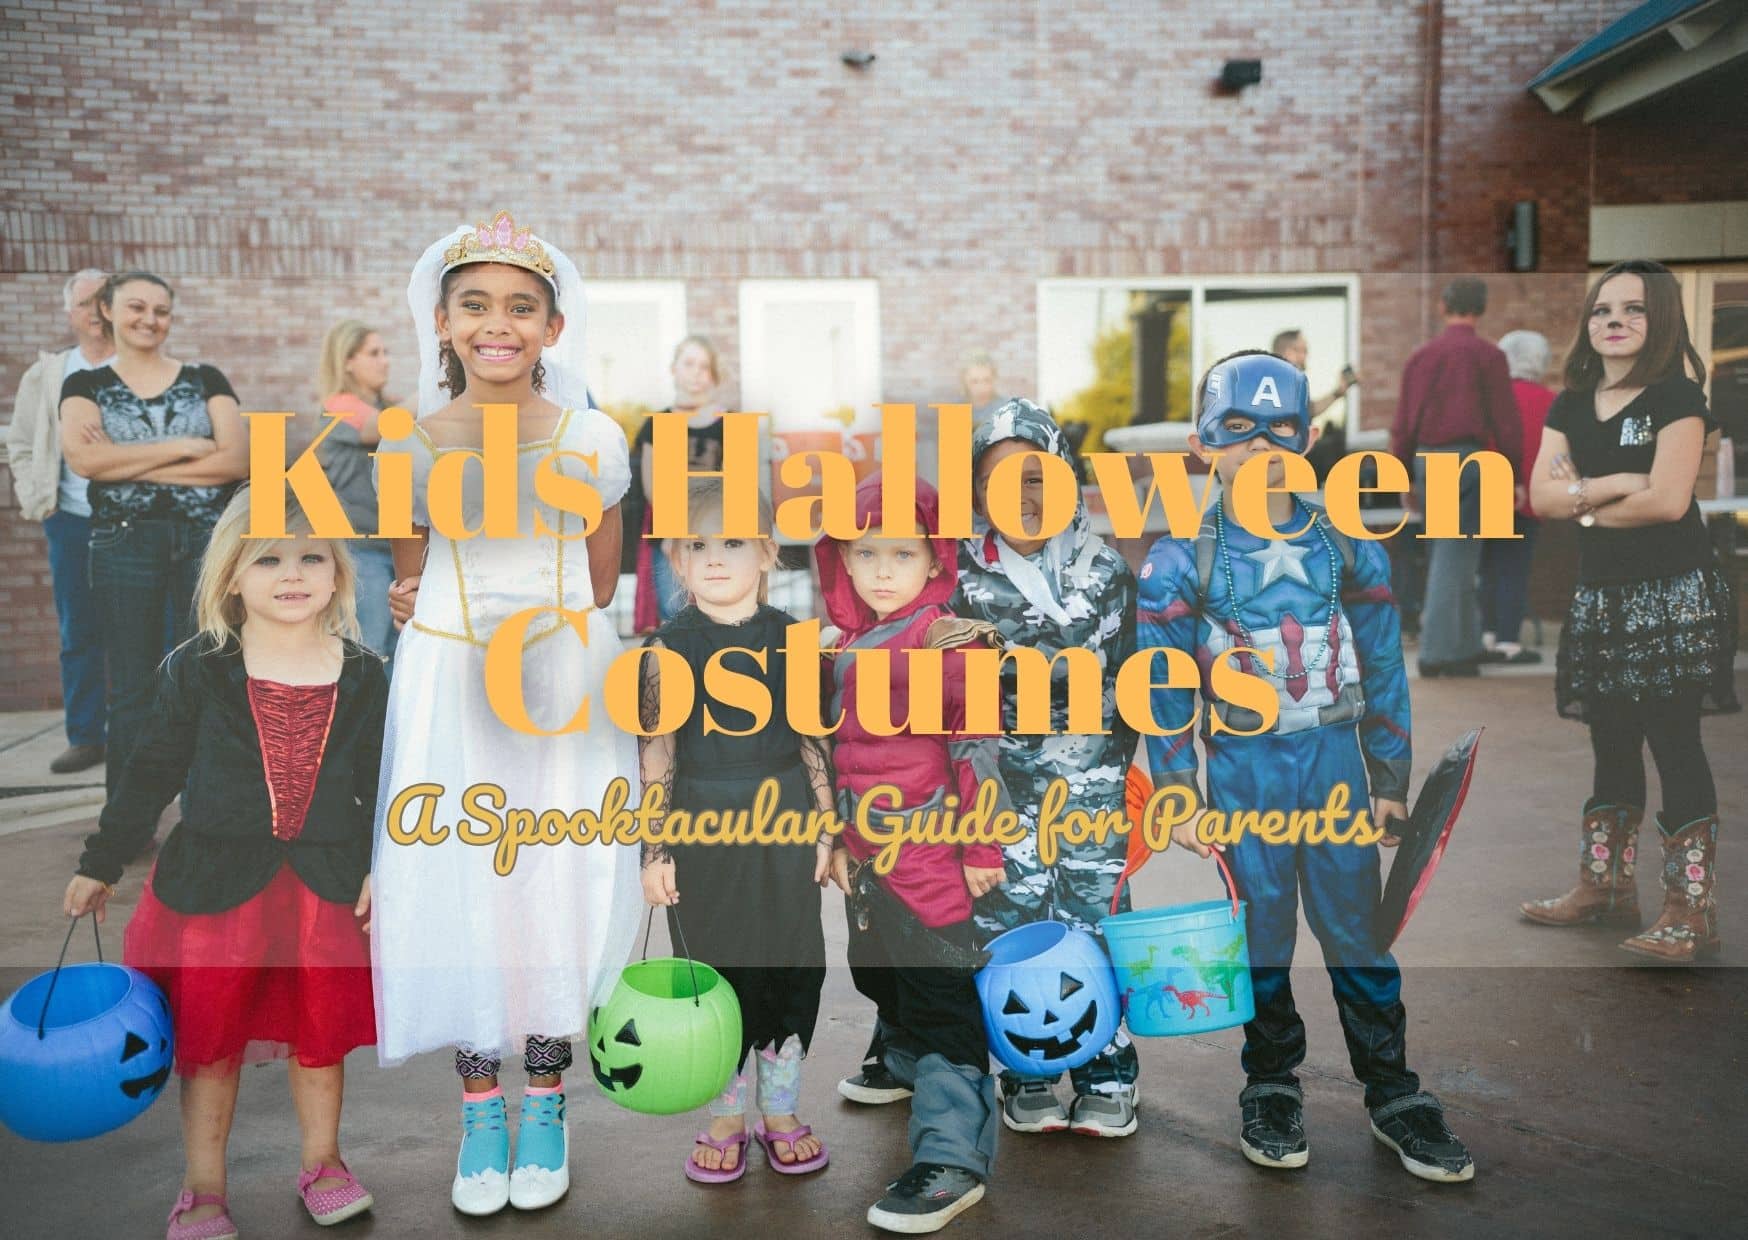 Kids Halloween Costumes: A Spooktacular Guide For Parents